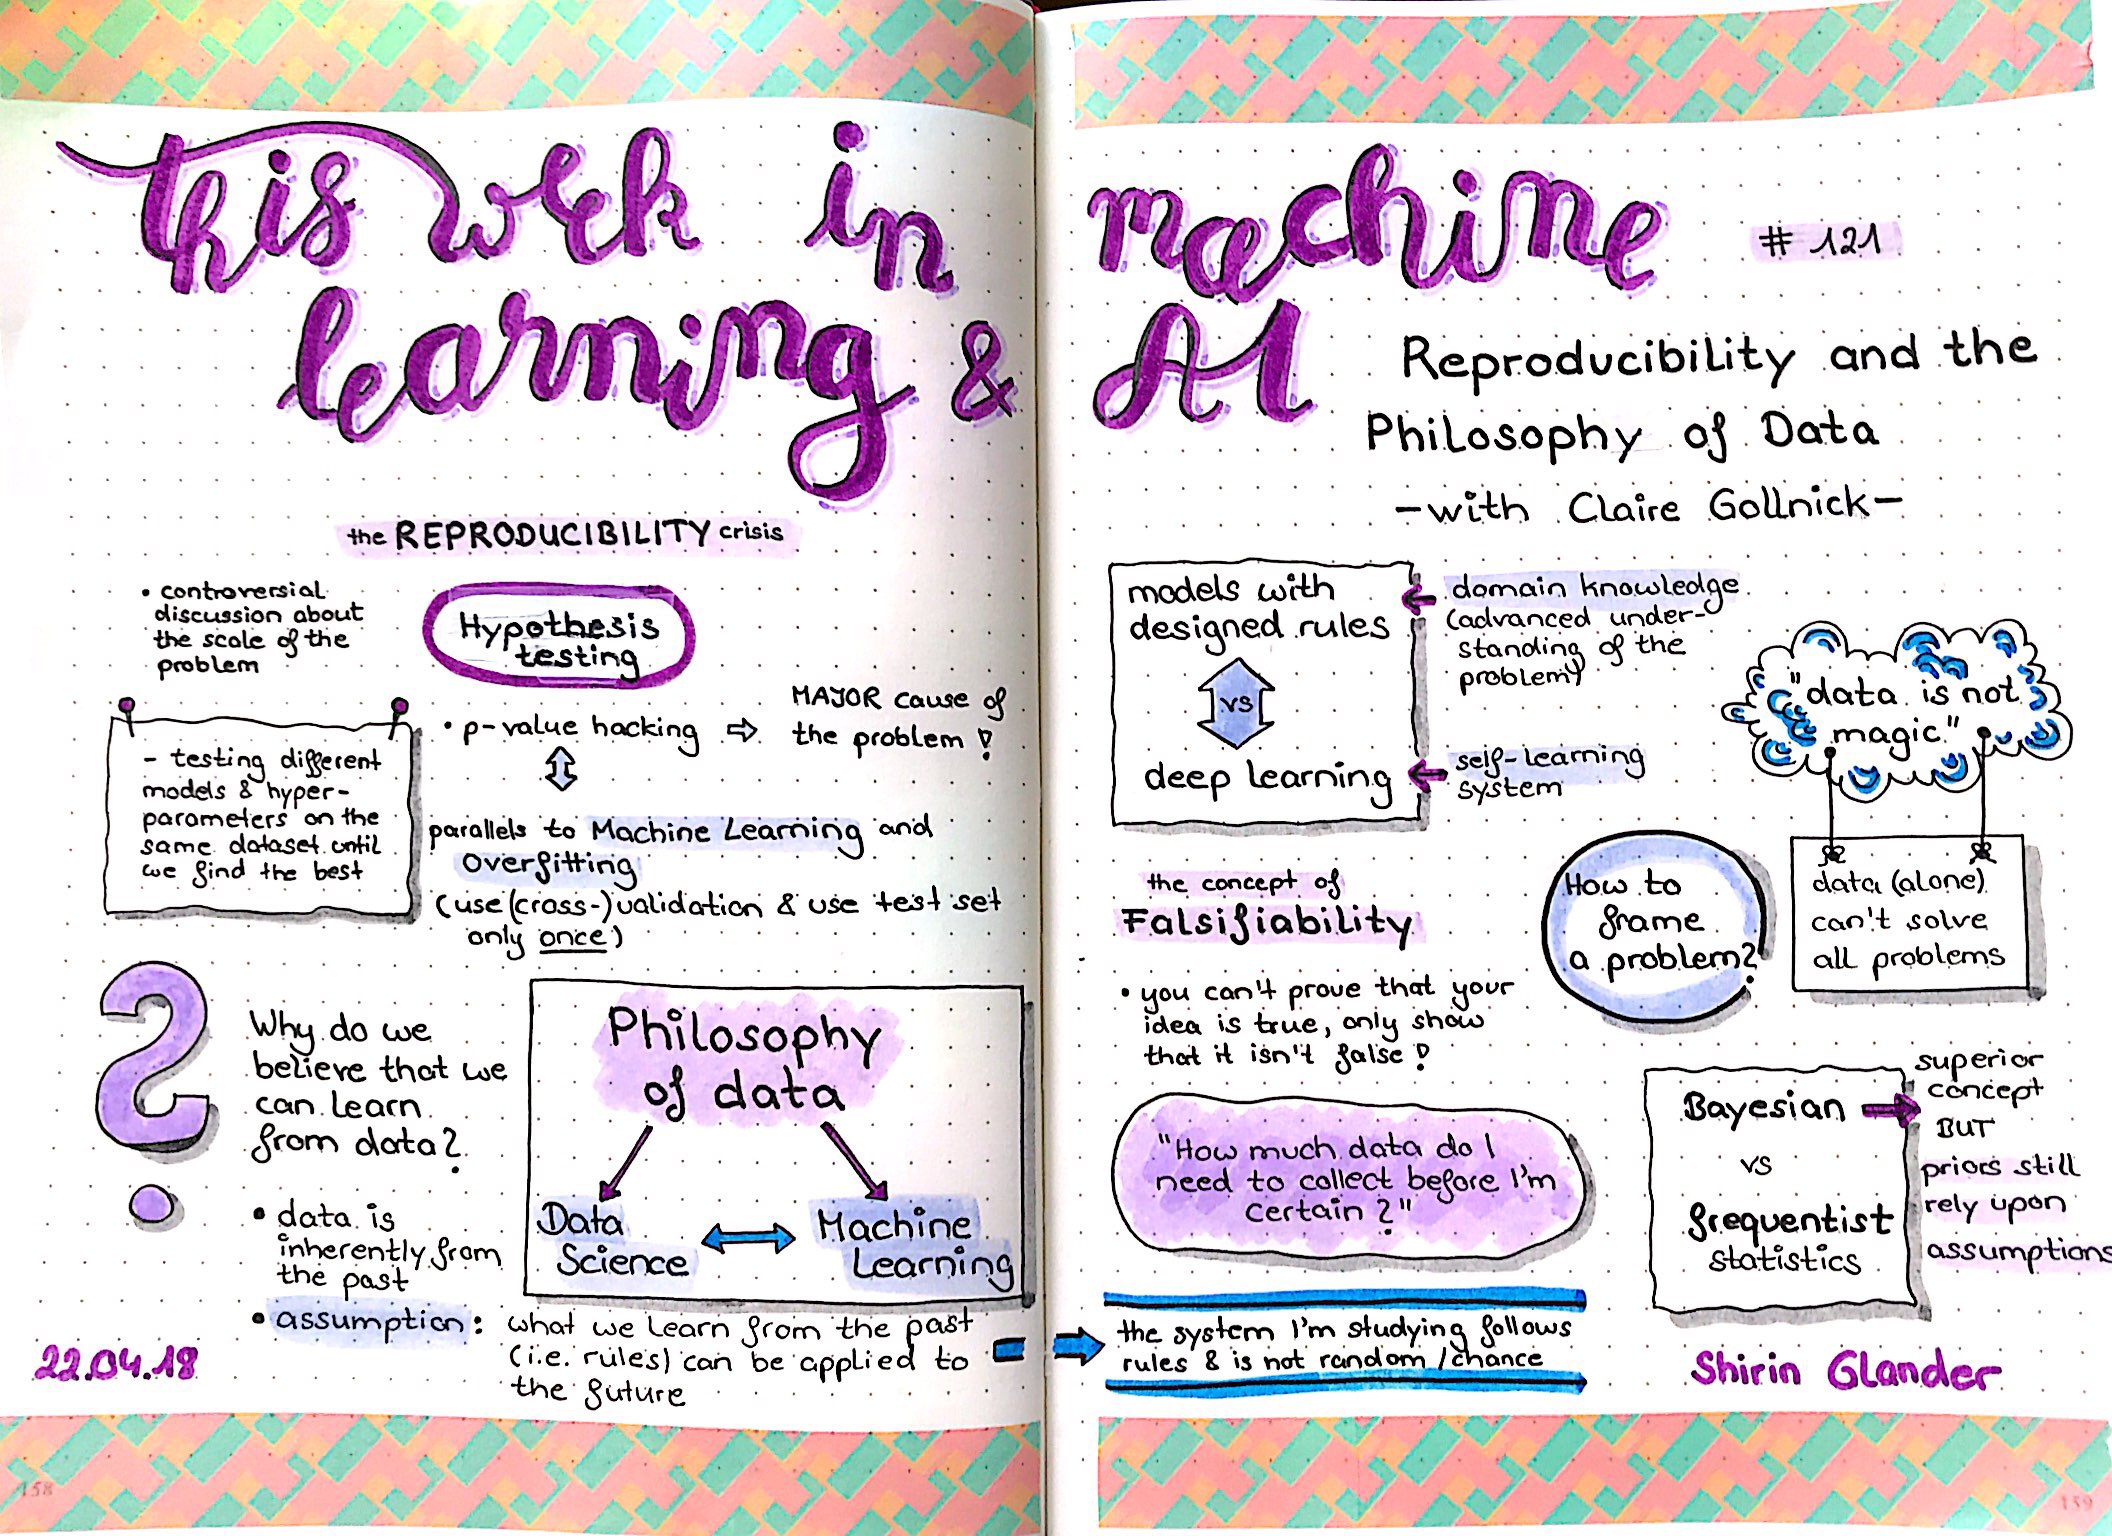 Sketchnotes from TWiMLAI talk #121: Reproducibility and the Philosophy of Data with Clare Gollnick